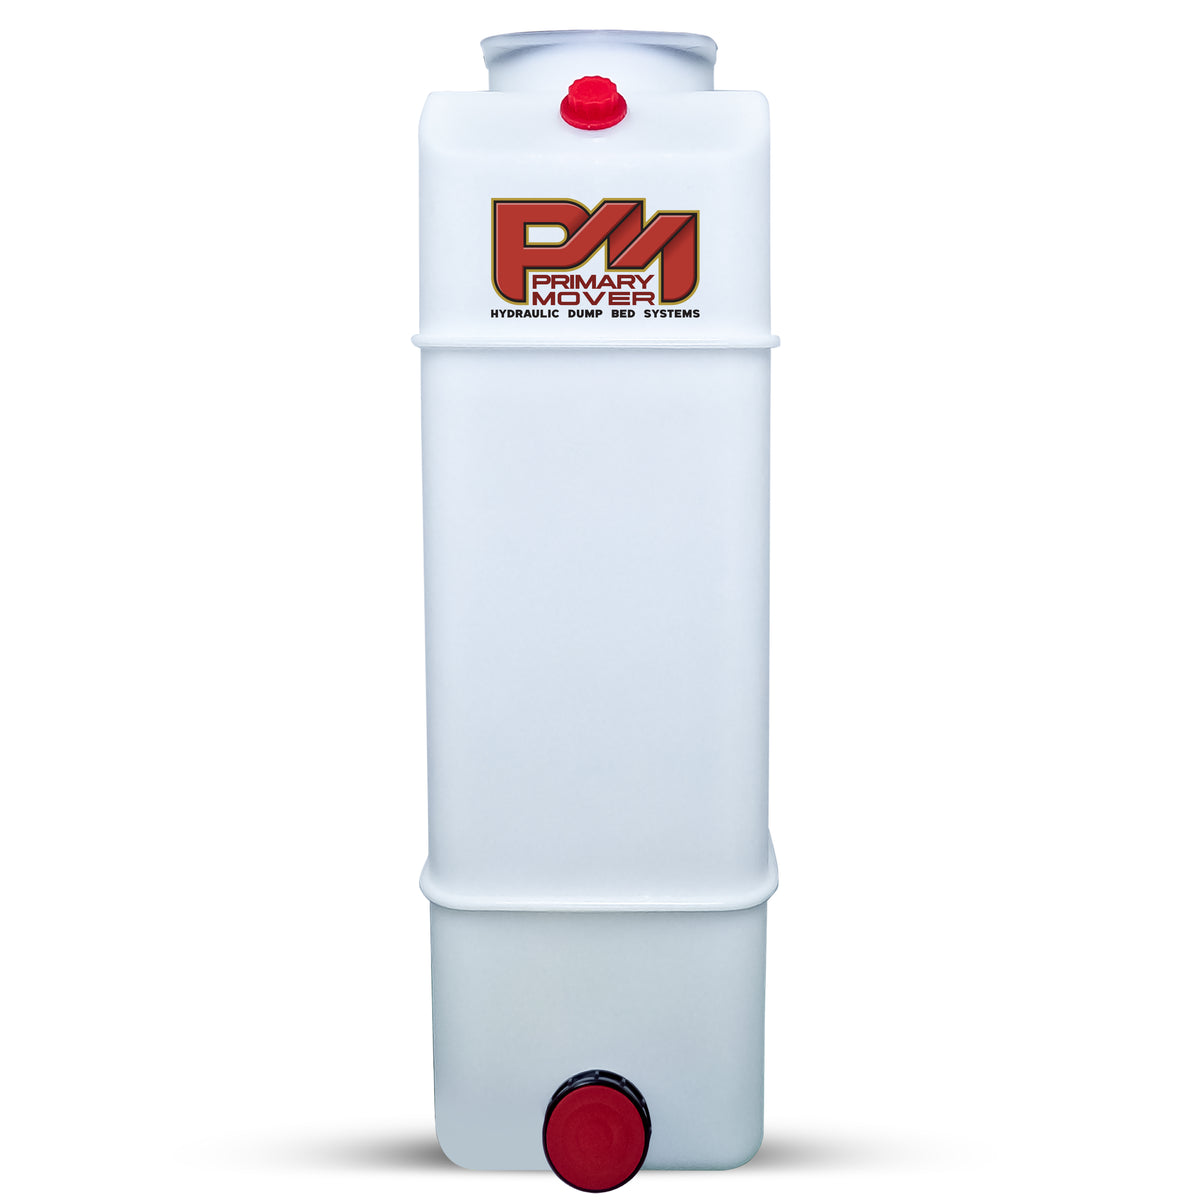 A 13-quart poly hydraulic reservoir tank with plug and breather caps. Precision measurements for compatibility with various hydraulic systems. Dimensions: 21.5 L x 7 W x 8.0 H.